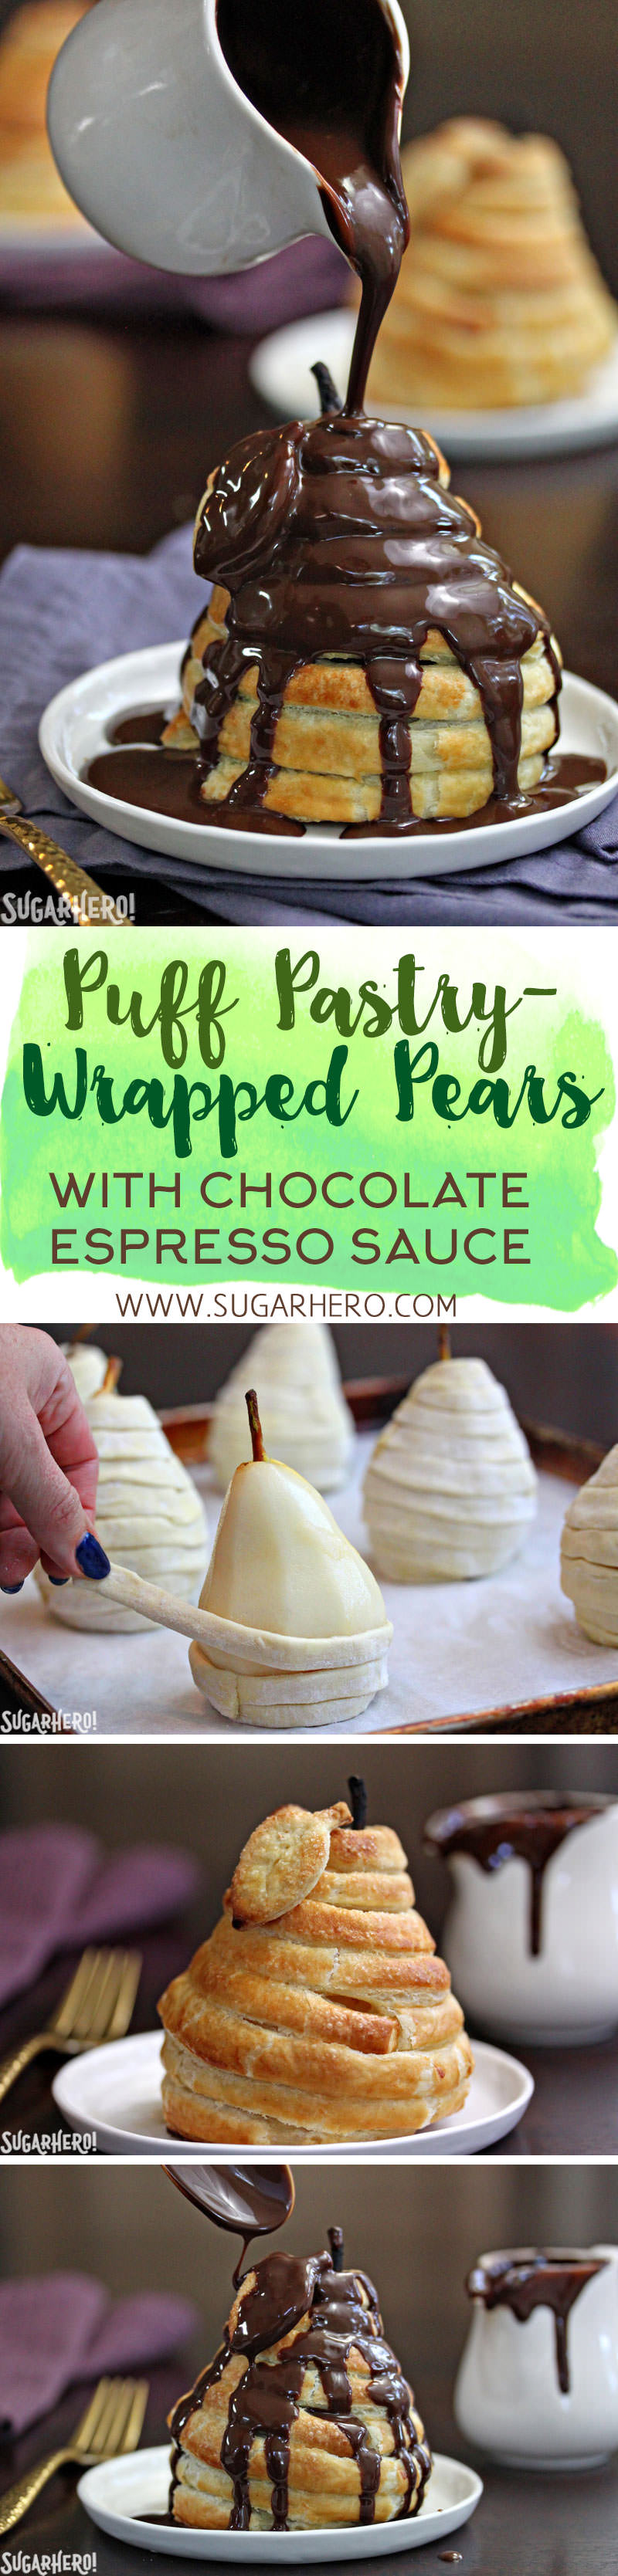 Puff Pastry-Wrapped Pears | From SugarHero.com